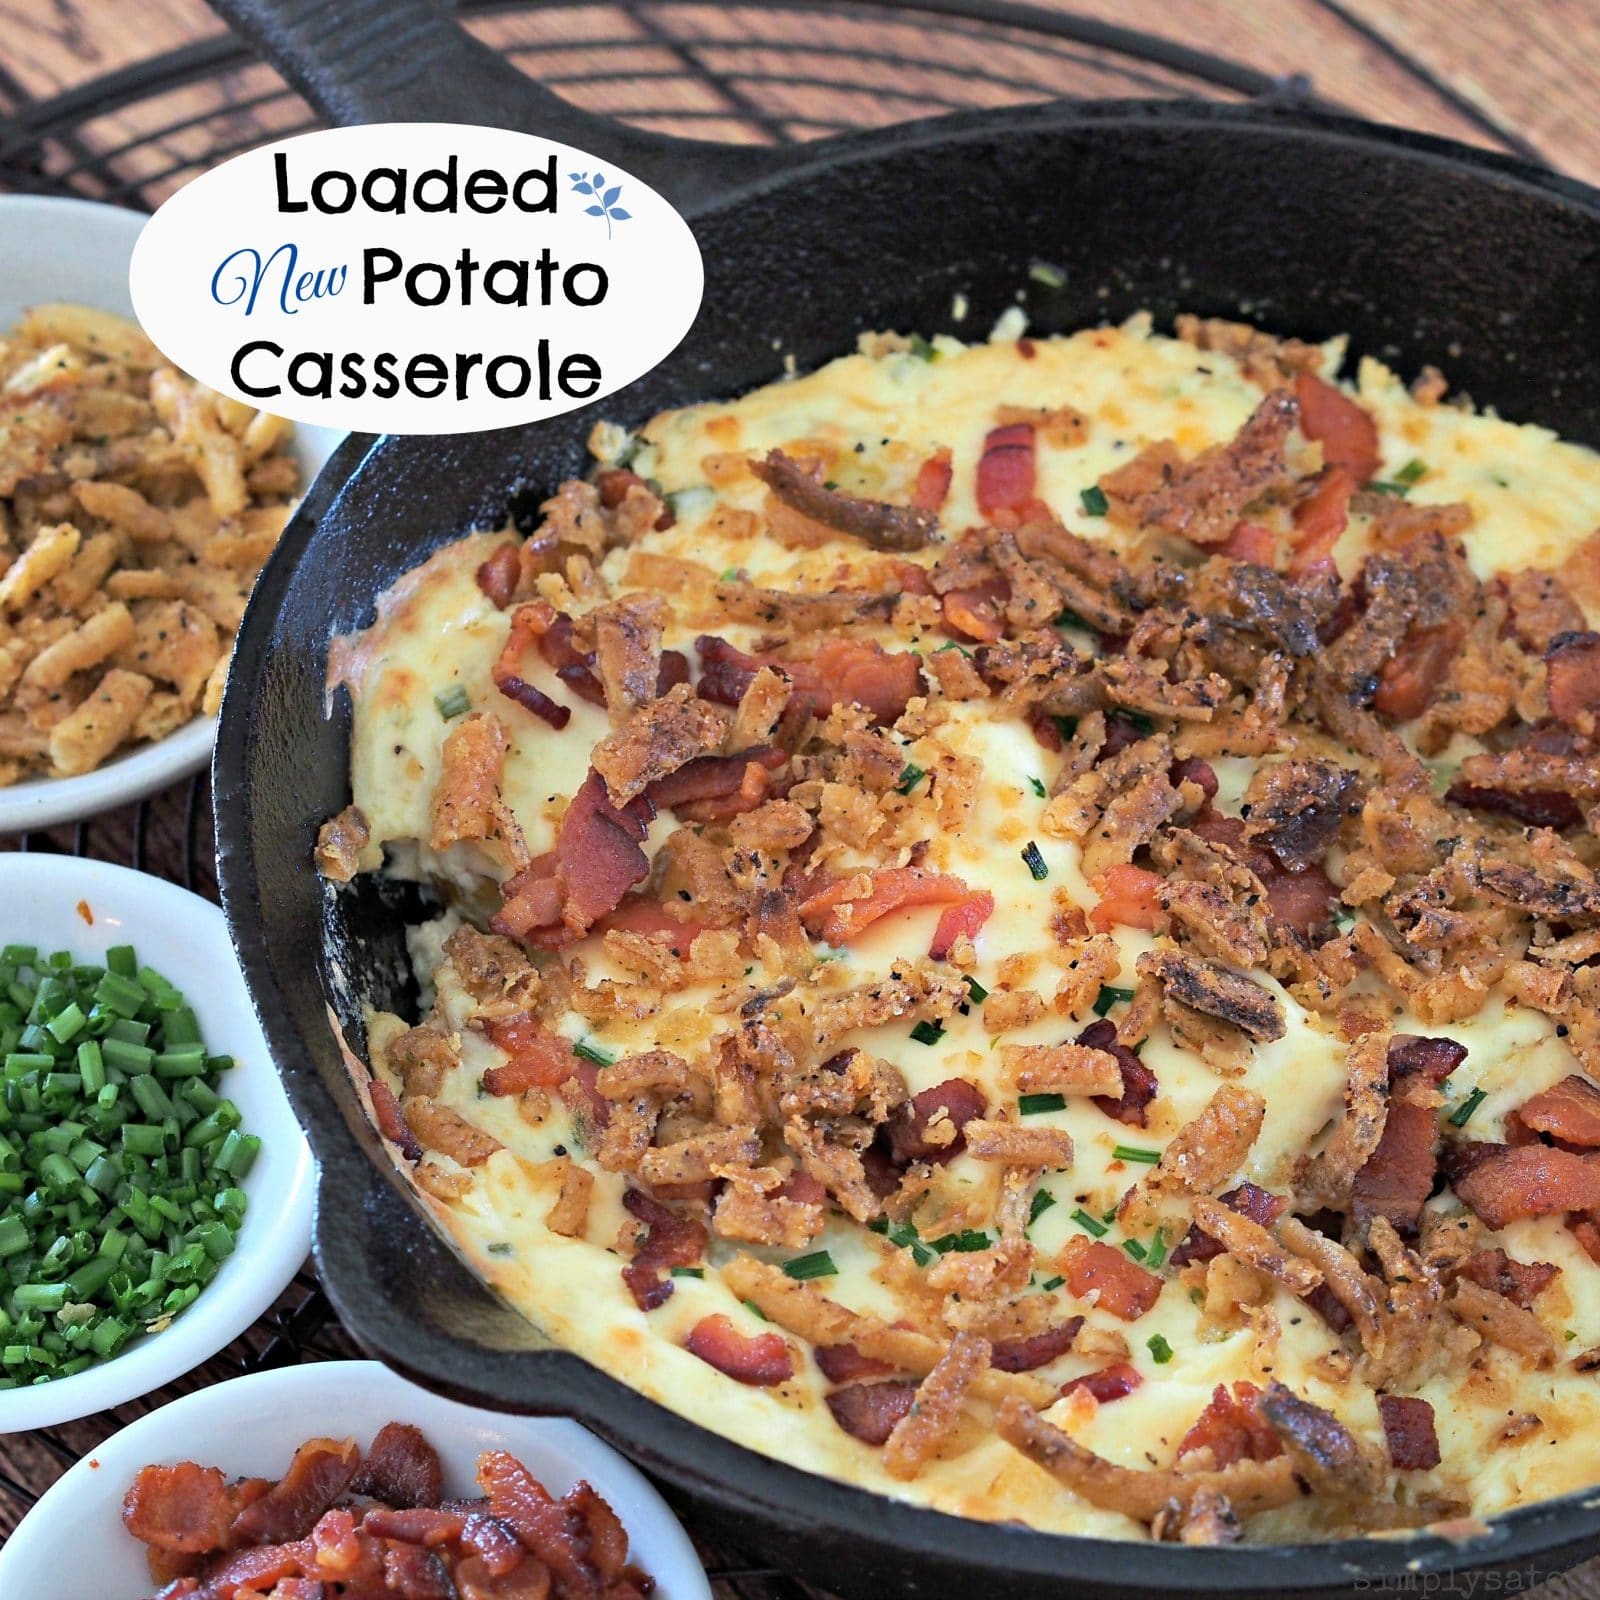 Loaded New Potato Casserole - roasted new potatoes combined with cheese, chives, sour cream and bacon.  Serve as a side or a beautiful appetizer.